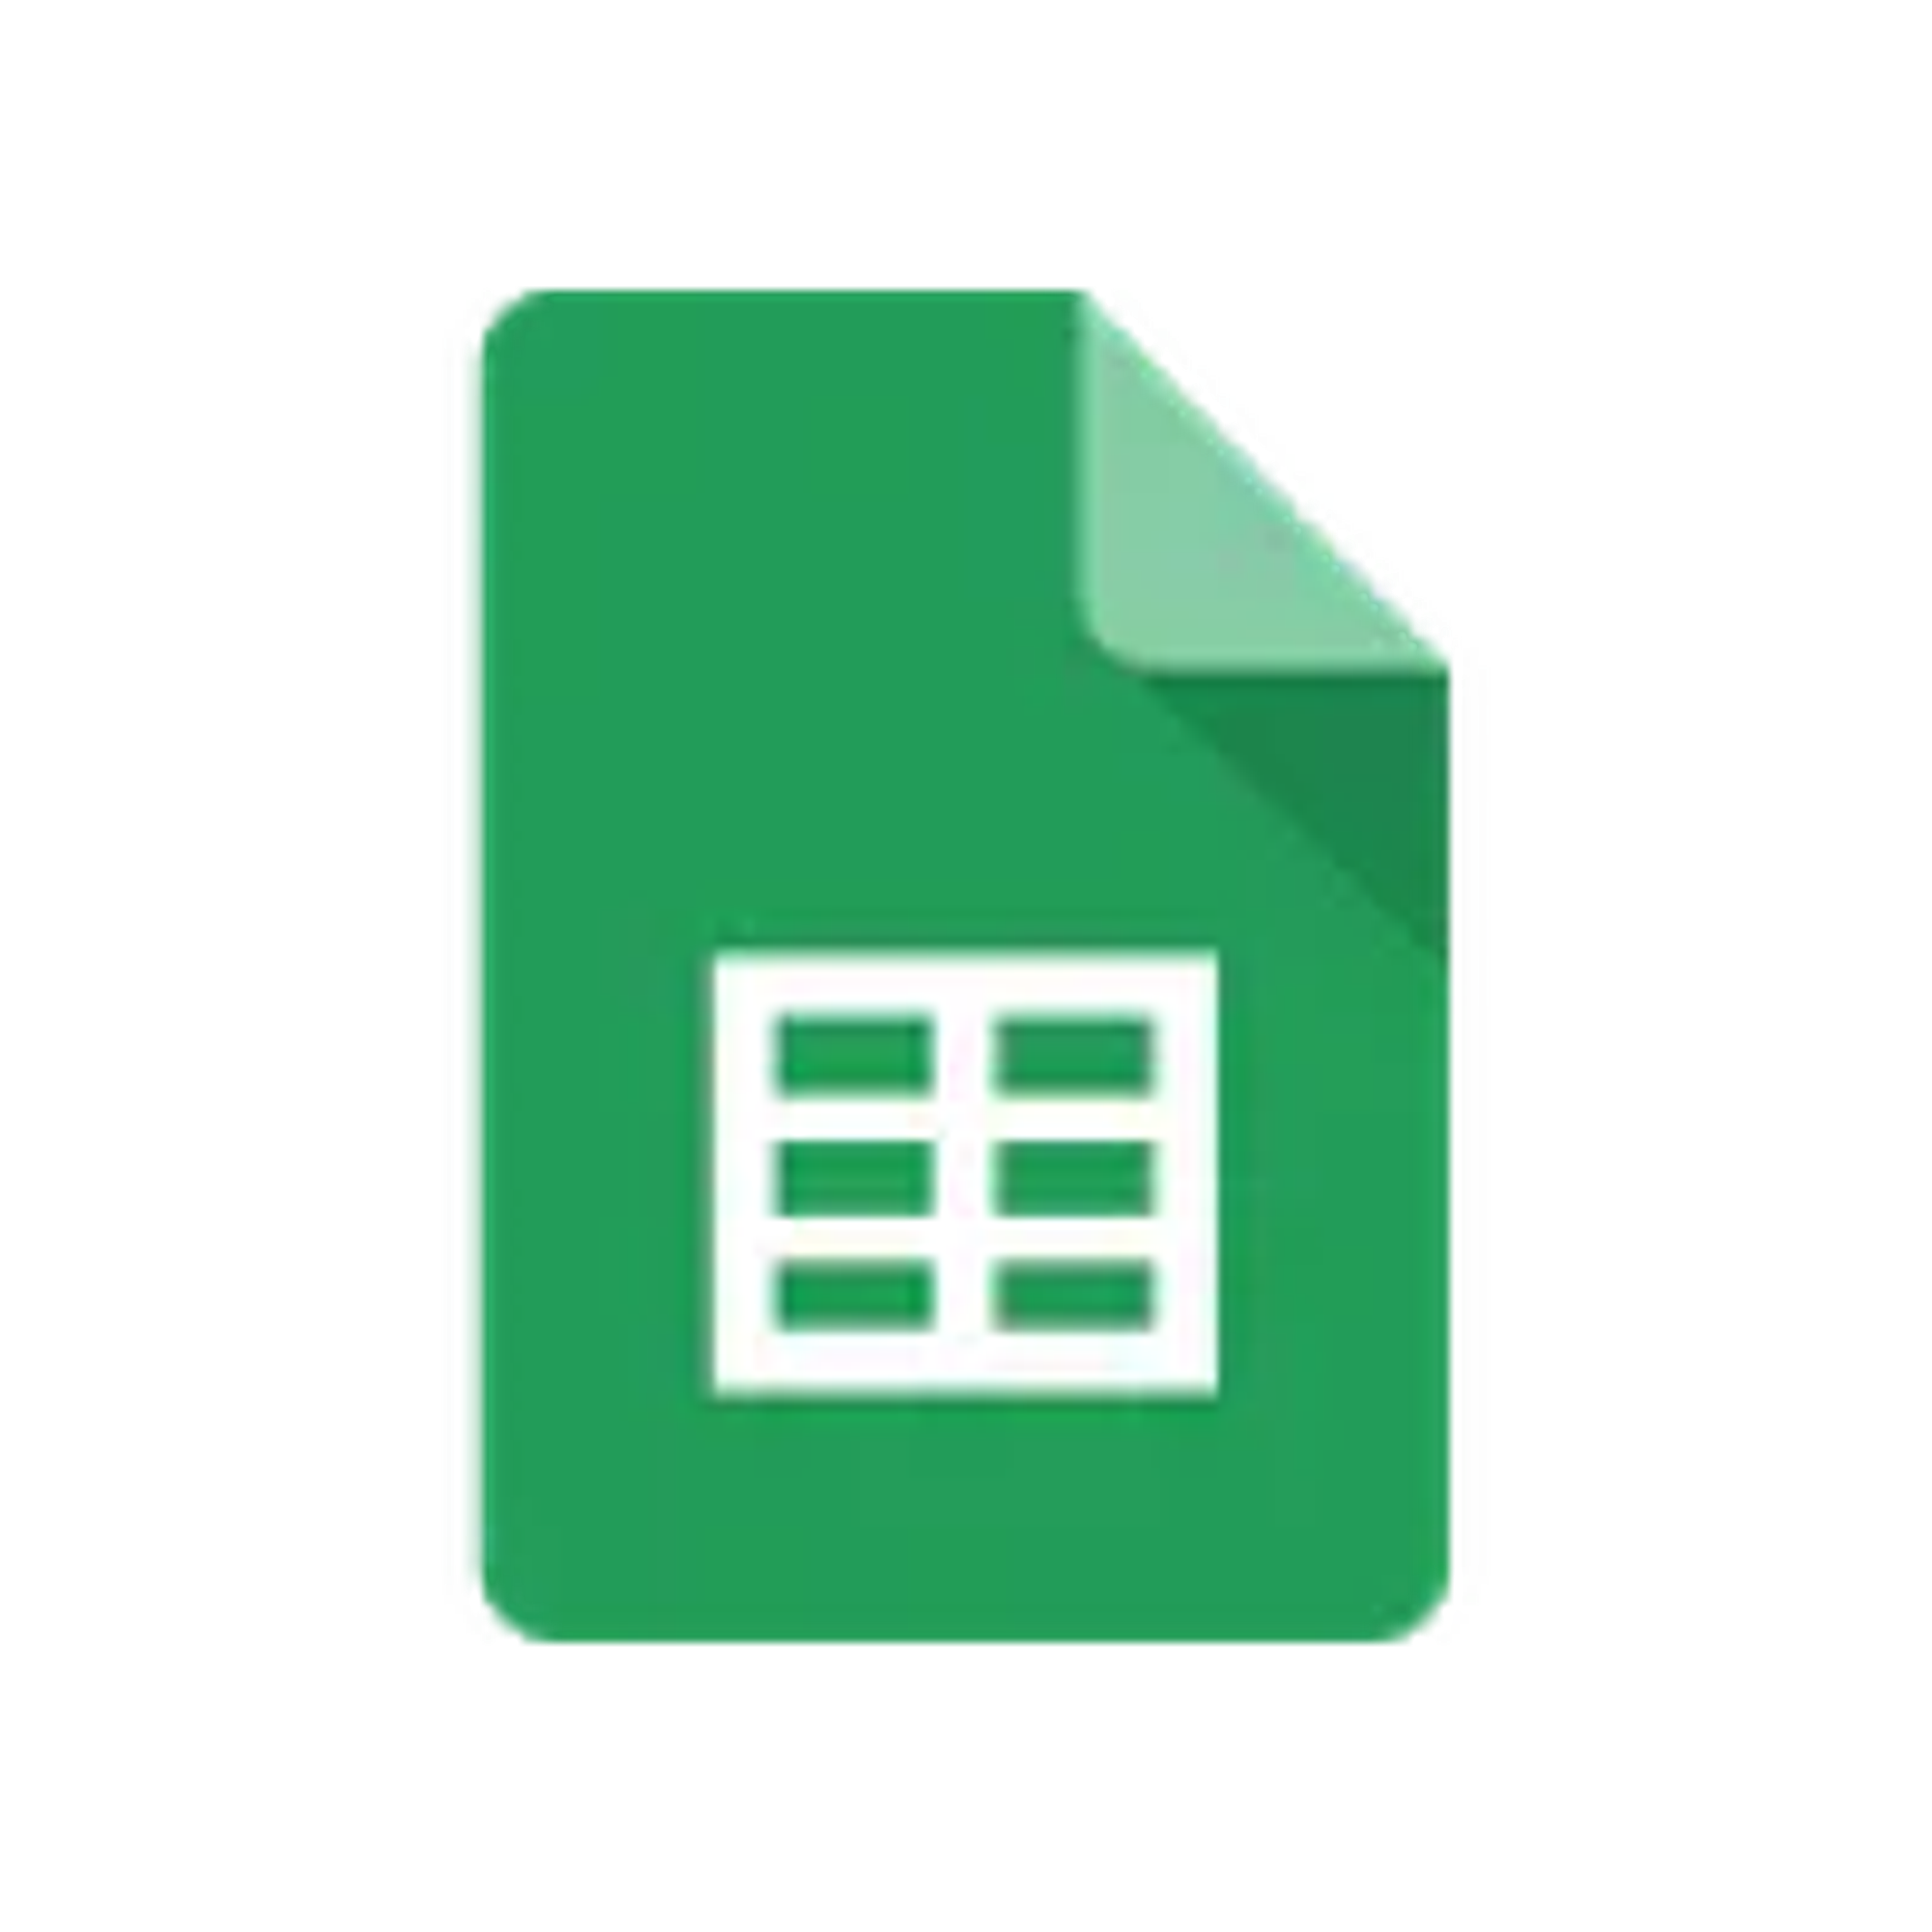 Add Google Sheet rows for new Tally responses